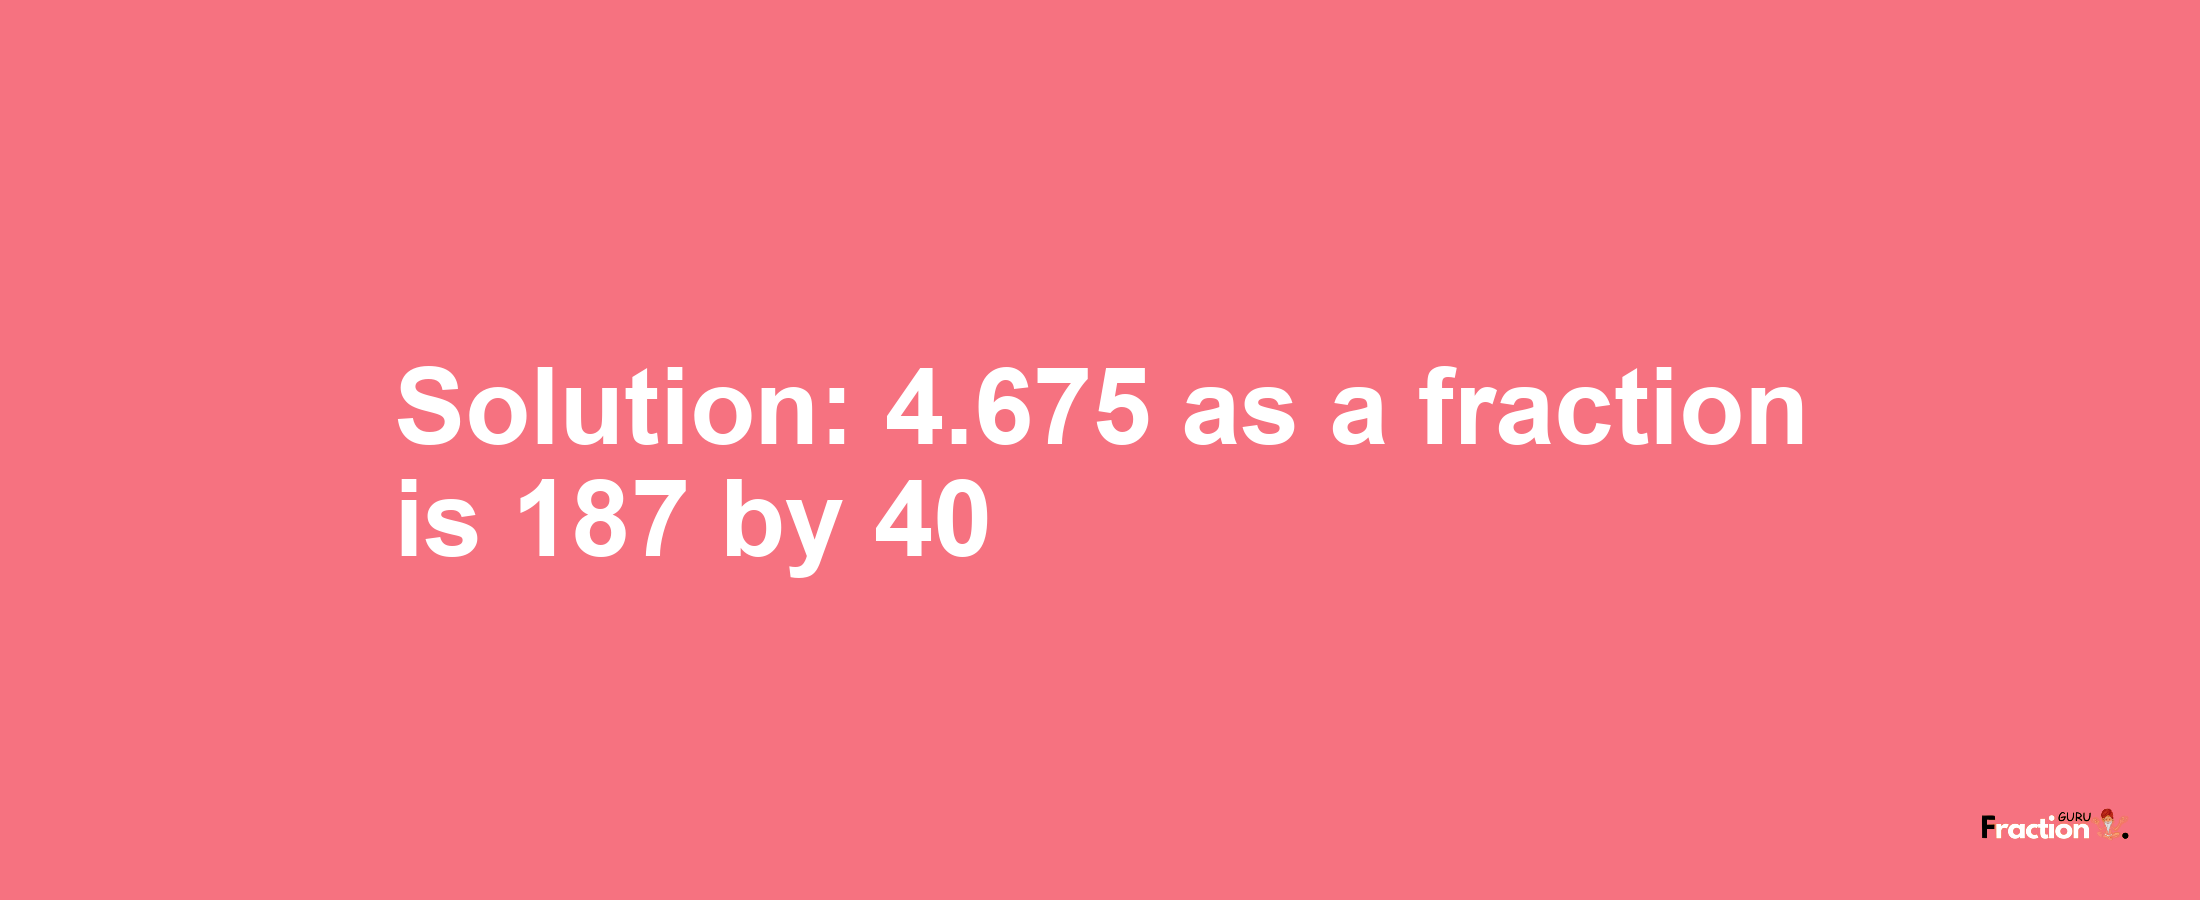 Solution:4.675 as a fraction is 187/40